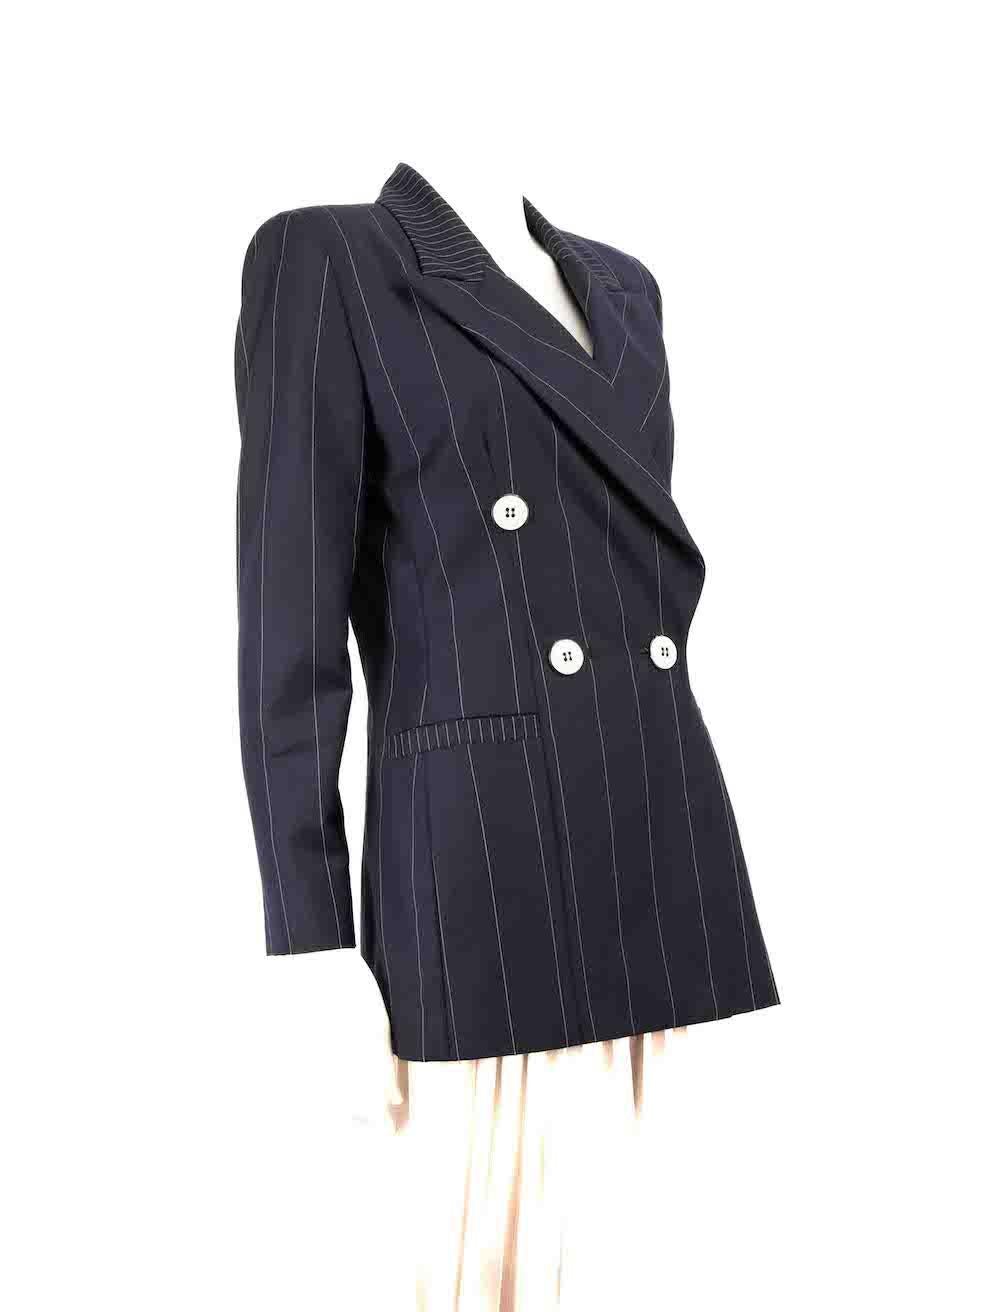 CONDITION is Very good. Hardly any visible wear to blazer is evident on this used Gai Mattiolo designer resale item.
 
 
 
 Details
 
 
 Navy
 
 Wool
 
 Blazer
 
 Pinstripe pattern
 
 Double breasted
 
 Shoulder pads
 
 Button up fastening
 
 3x